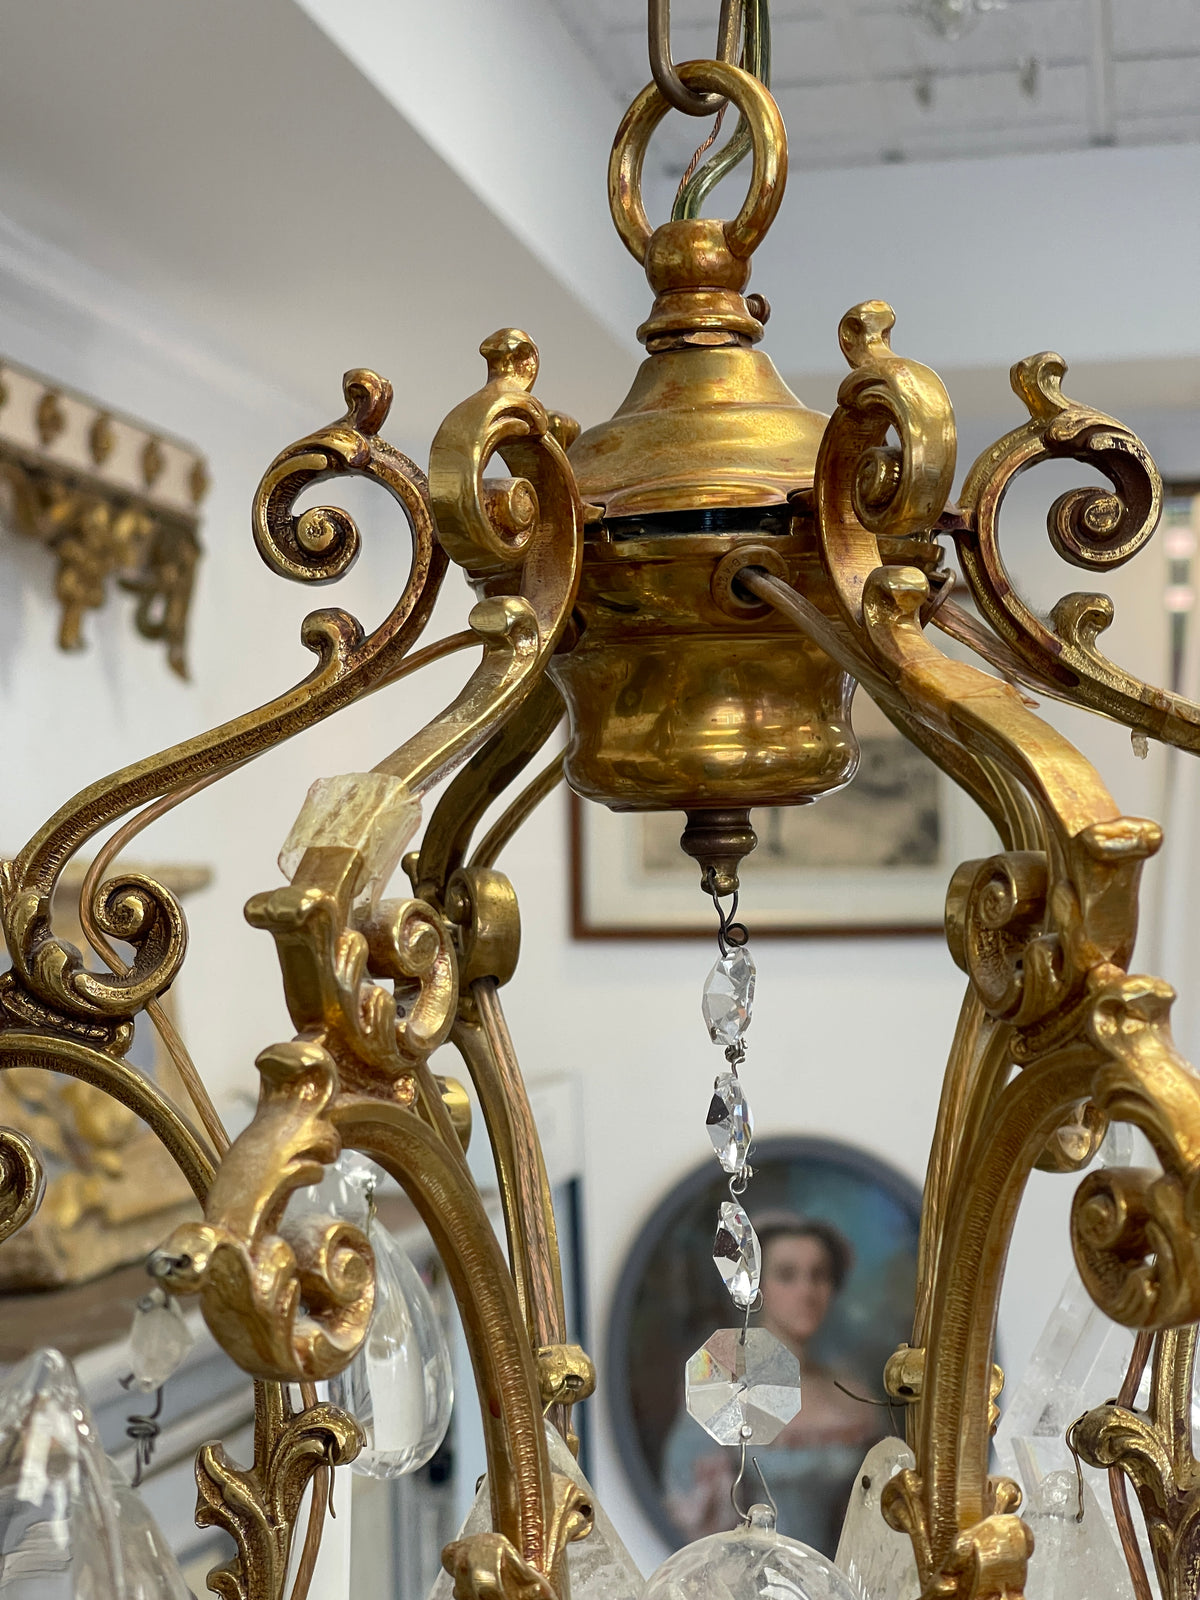 Small French Louis XV style gilt bronze and rock crystal eight light chandelier